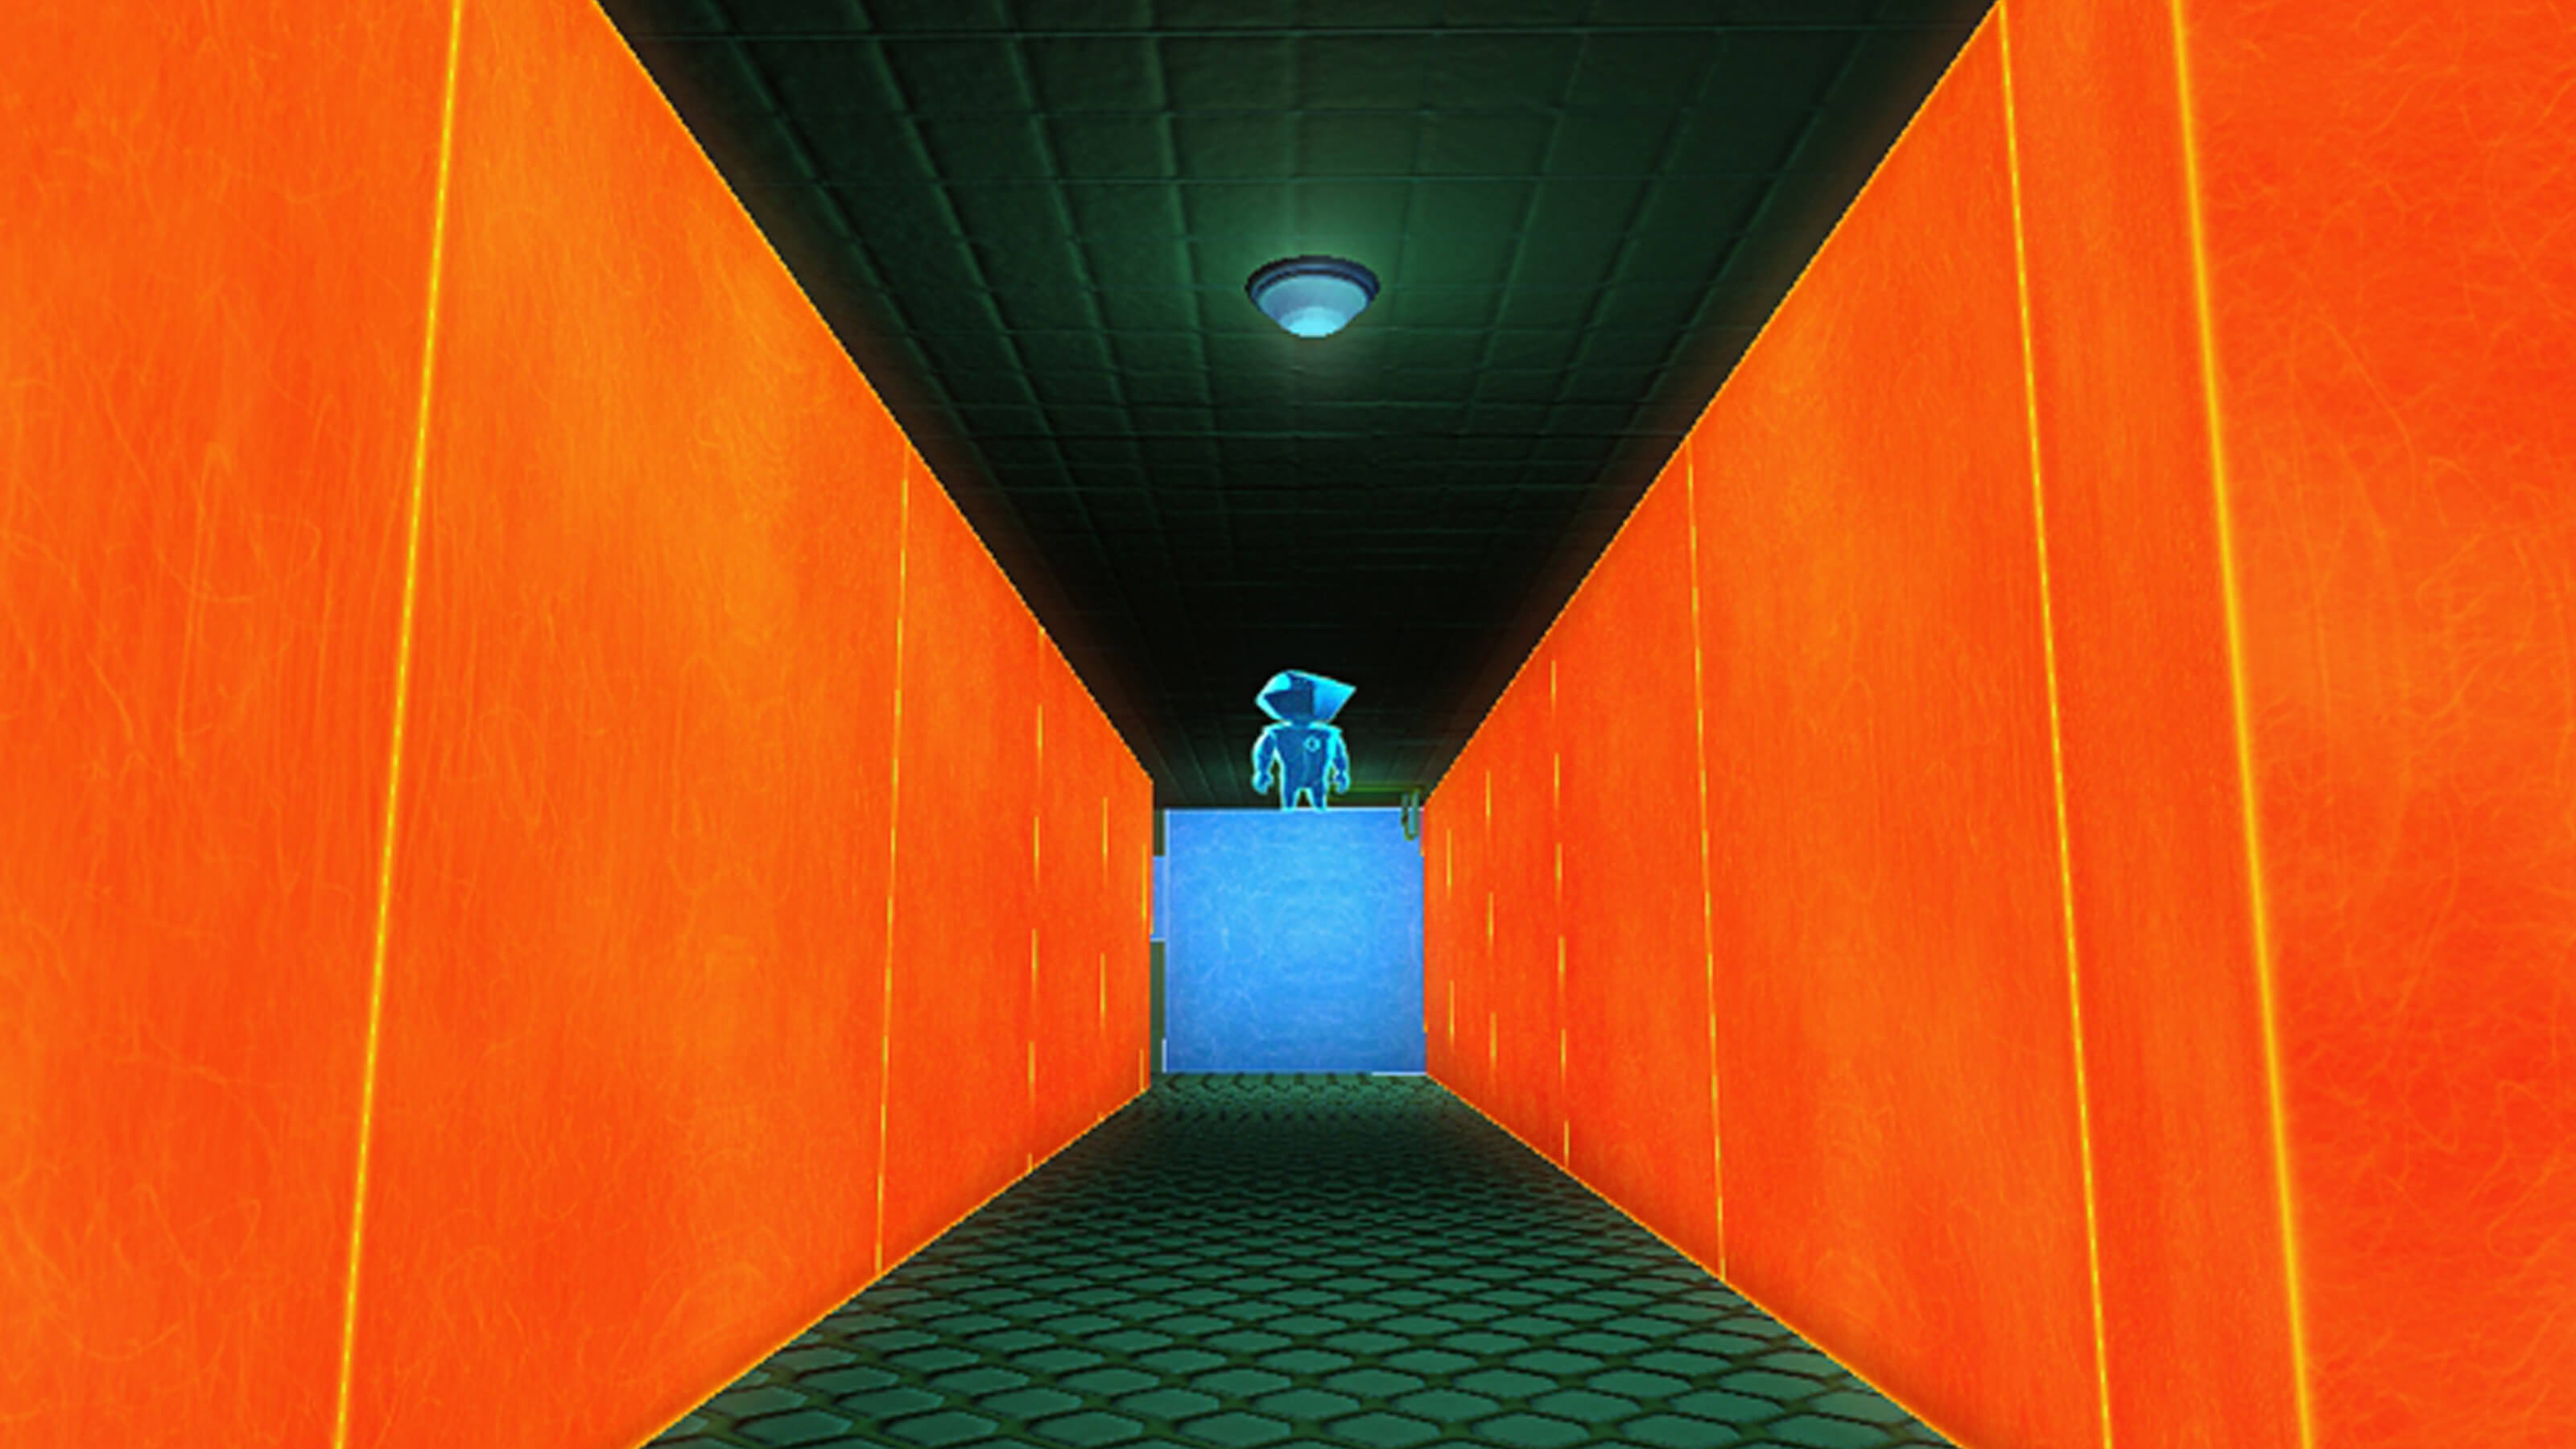 The player's blue avatar stands atop a blue block surrounded by orange walls